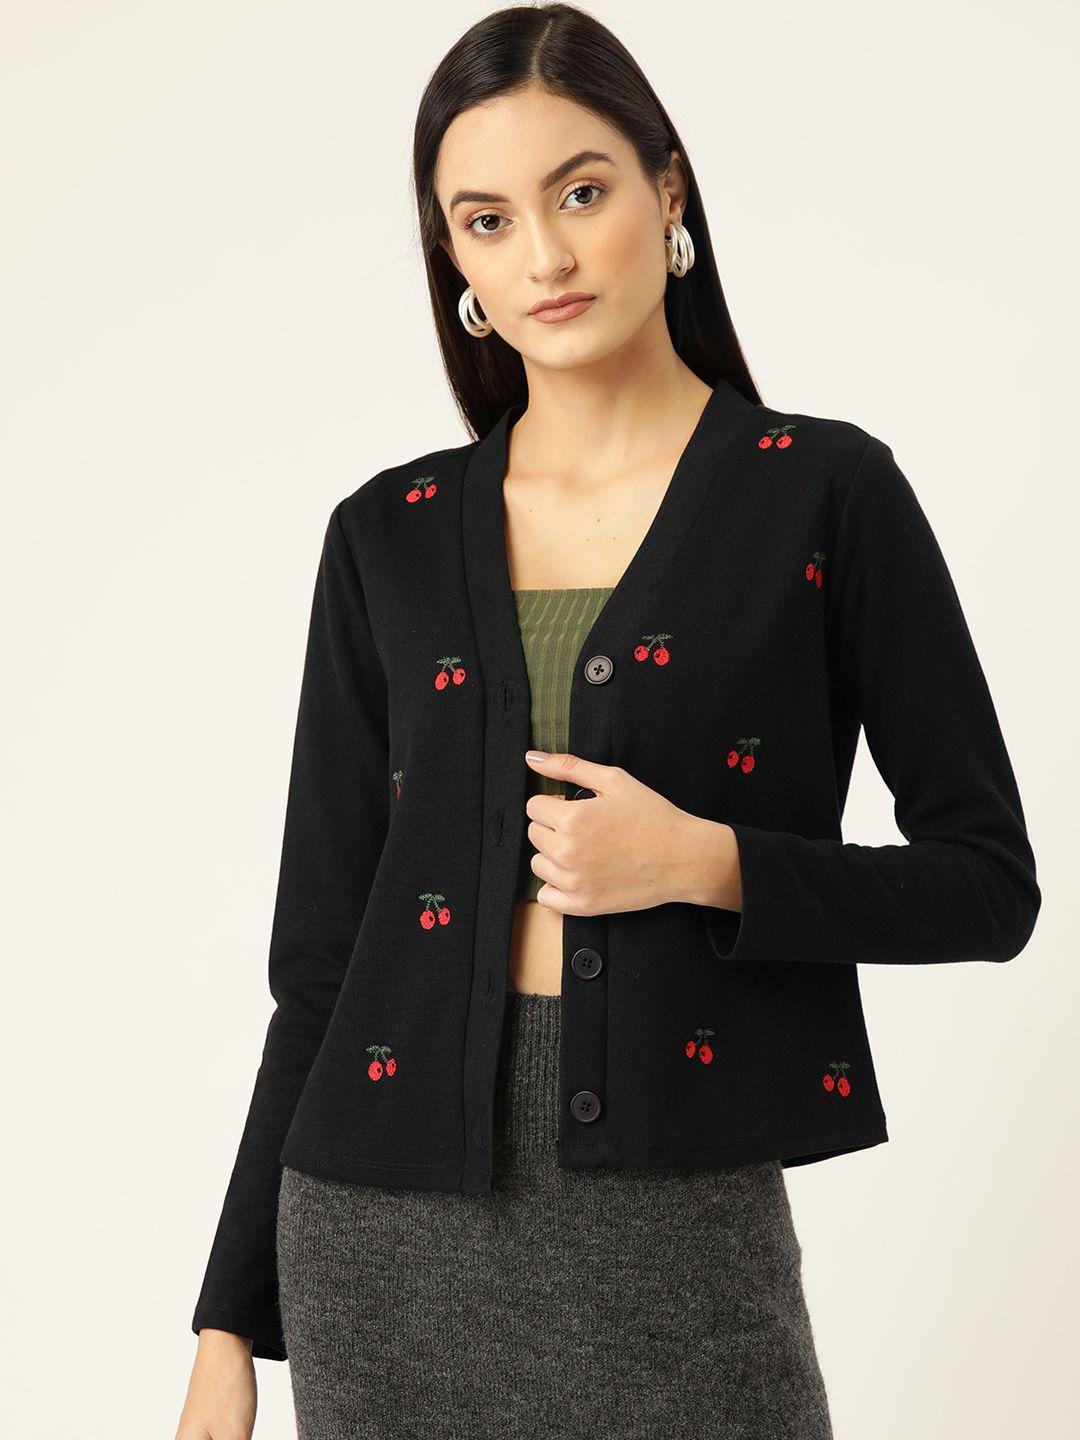 kassually women black embroidered cardigan sweater